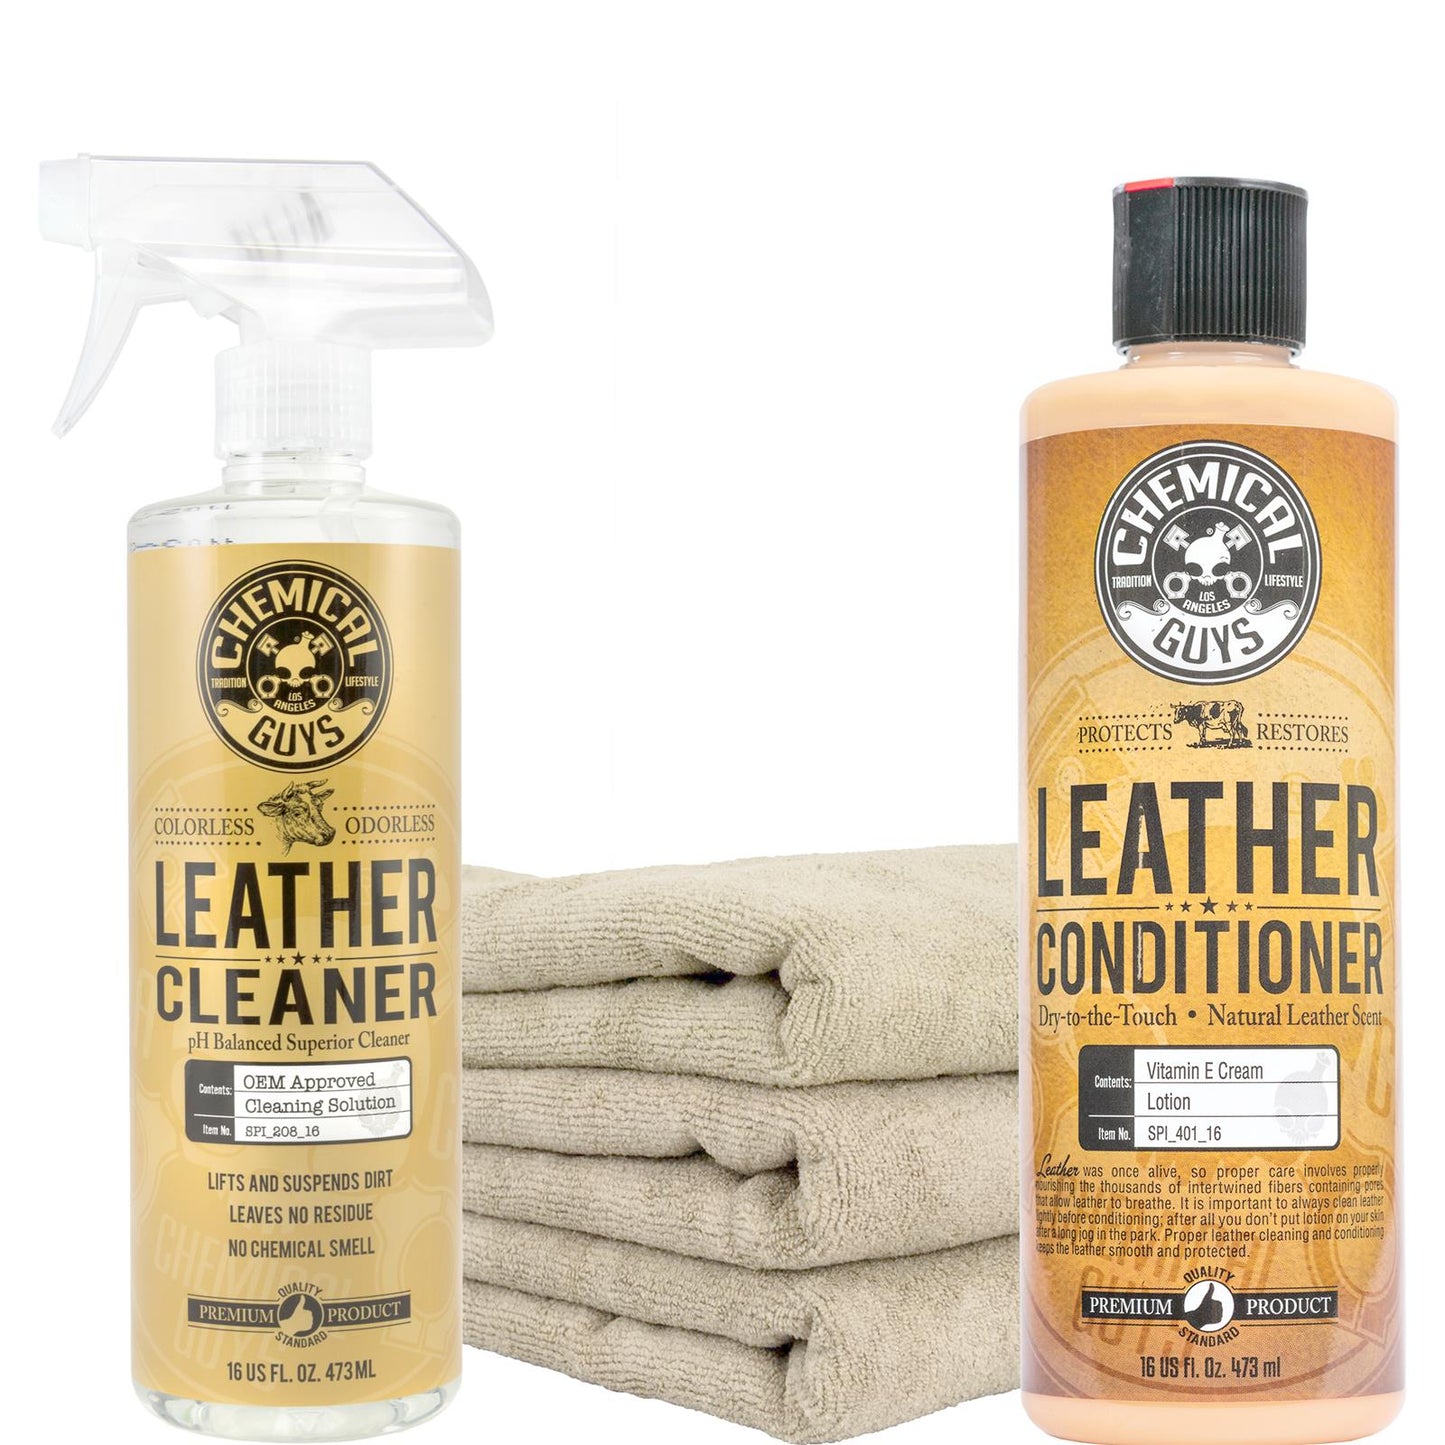 Classic mercedes benz car leather cleaning kit mb tex